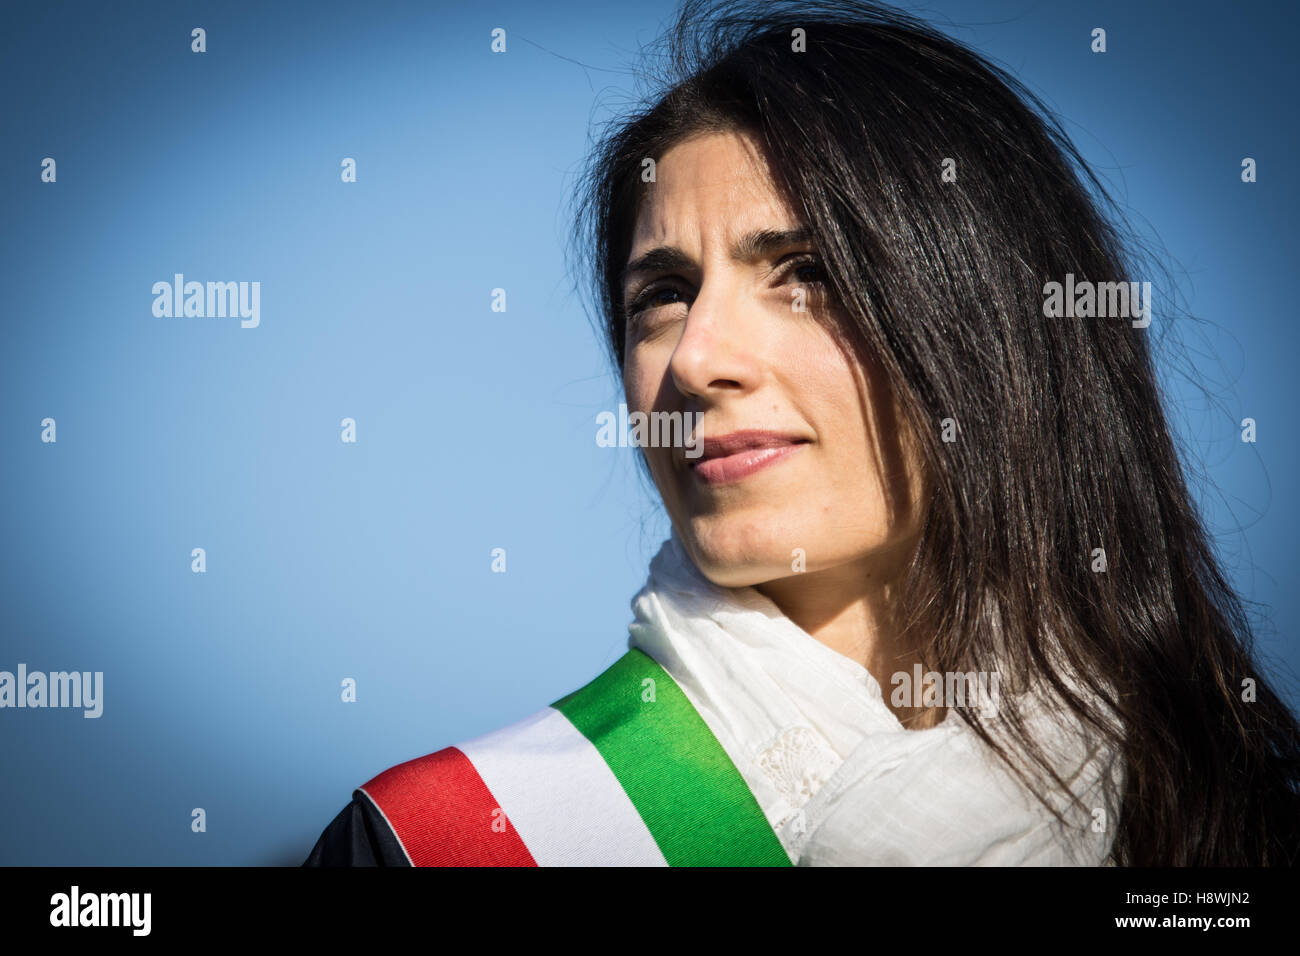 Rome, Italy. 16th Nov, 2016. Rome 16 Nivember 2016, Rome's mayor Virginia Raggi attends a press preview of the ancient Circus Maximus archaeological site after its restoration and its opening to the public, on November 16, 2016 in Rome. Since Royal Roman Age, any kind of public events have taken place at Circus Maximus : horses races, hunting with exotic animals, theatrical performances, public executions, religious or triumphal processions. the pictured Virginia Raggi © Andrea Ronchini/Pacific Press/Alamy Live News Stock Photo